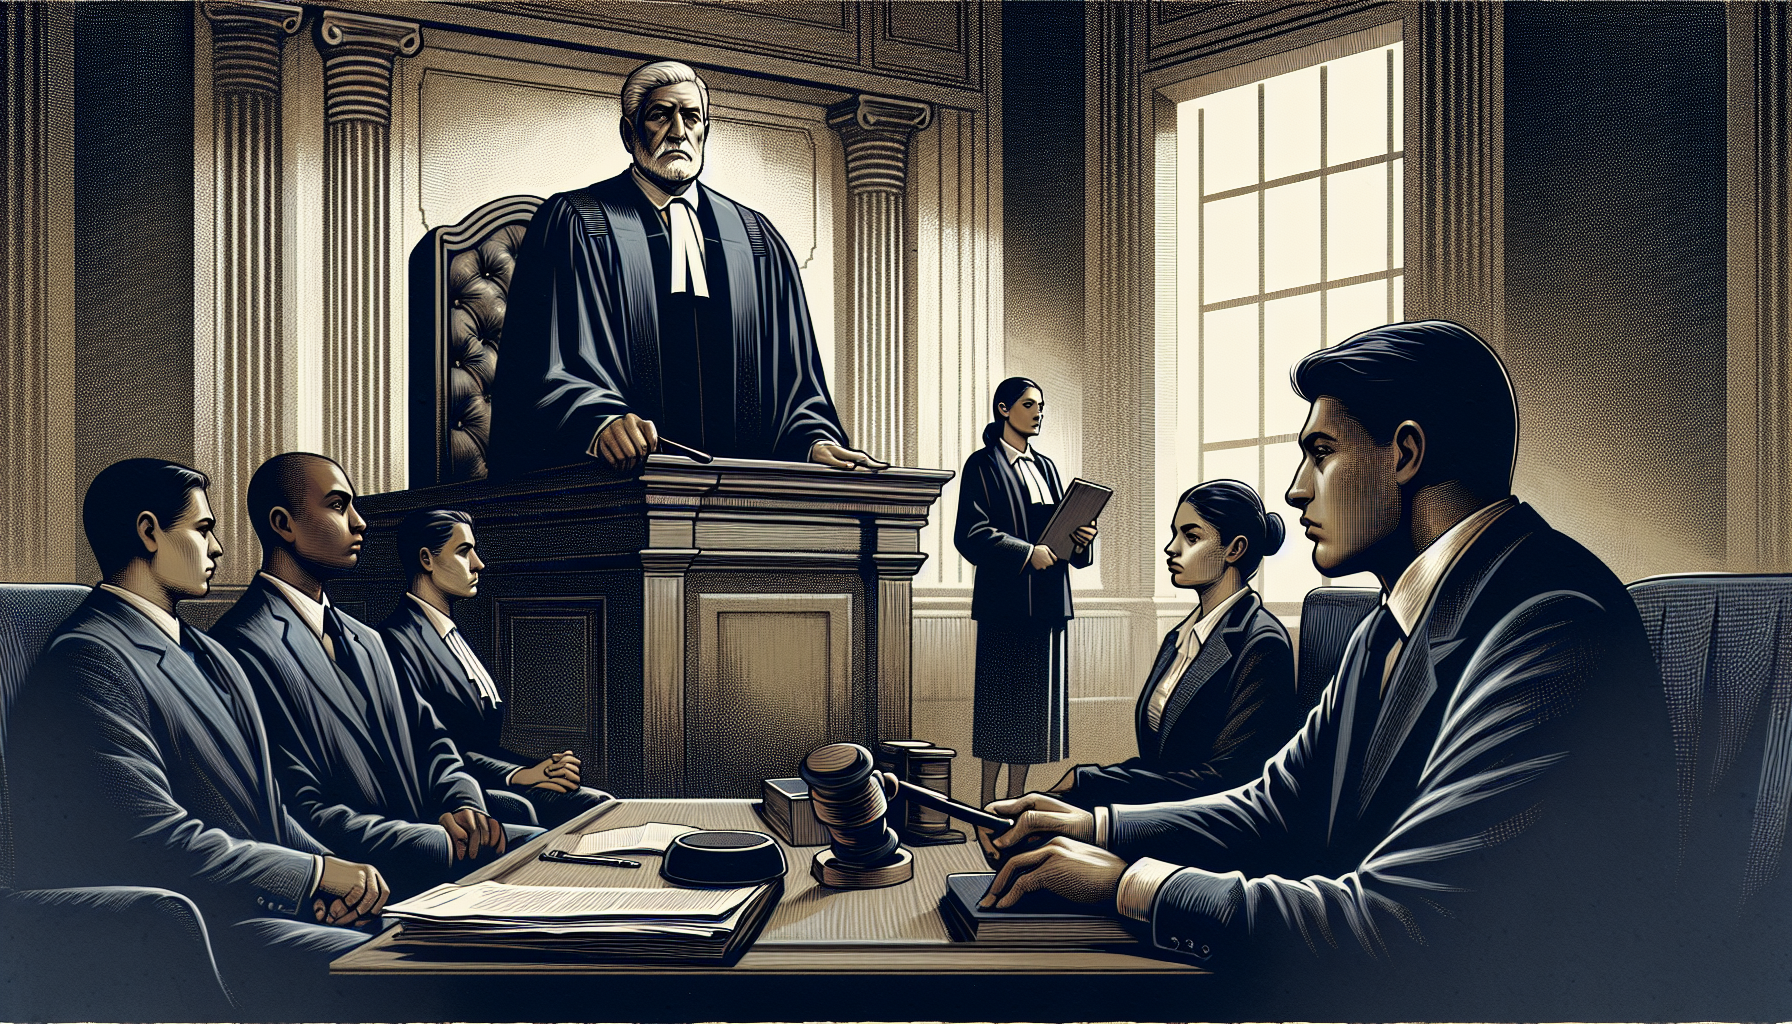 Illustration of a courtroom with a judge, a defendant, and a lawyer